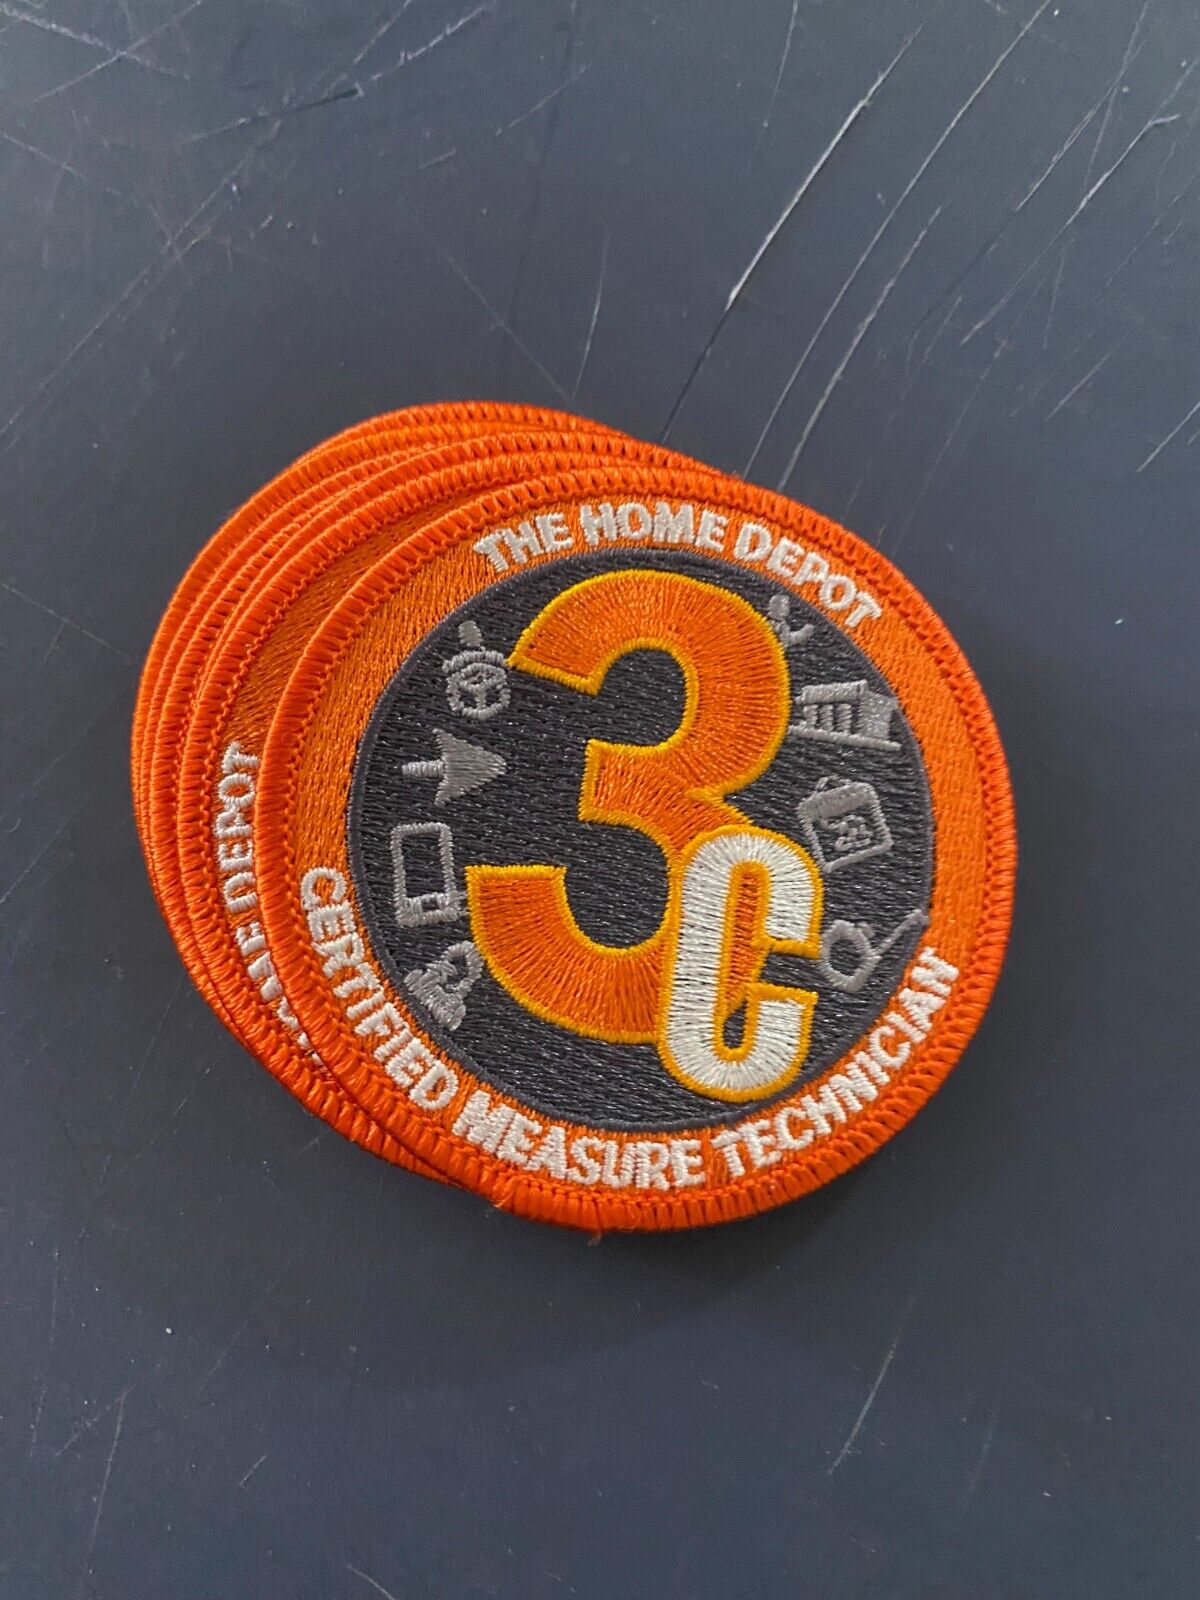 Home Depot 3C's Patch